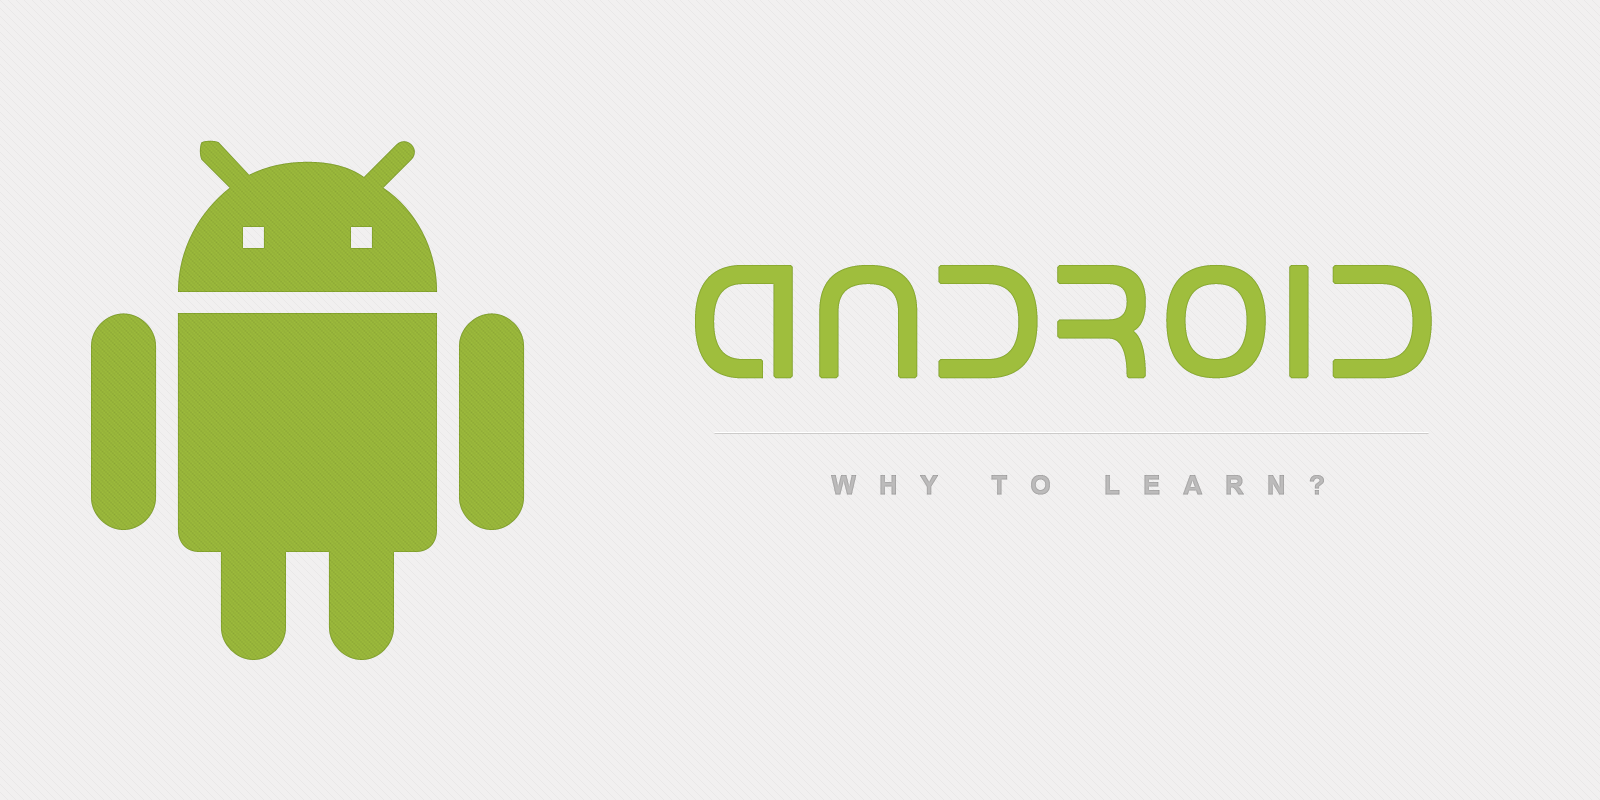 why to learn android